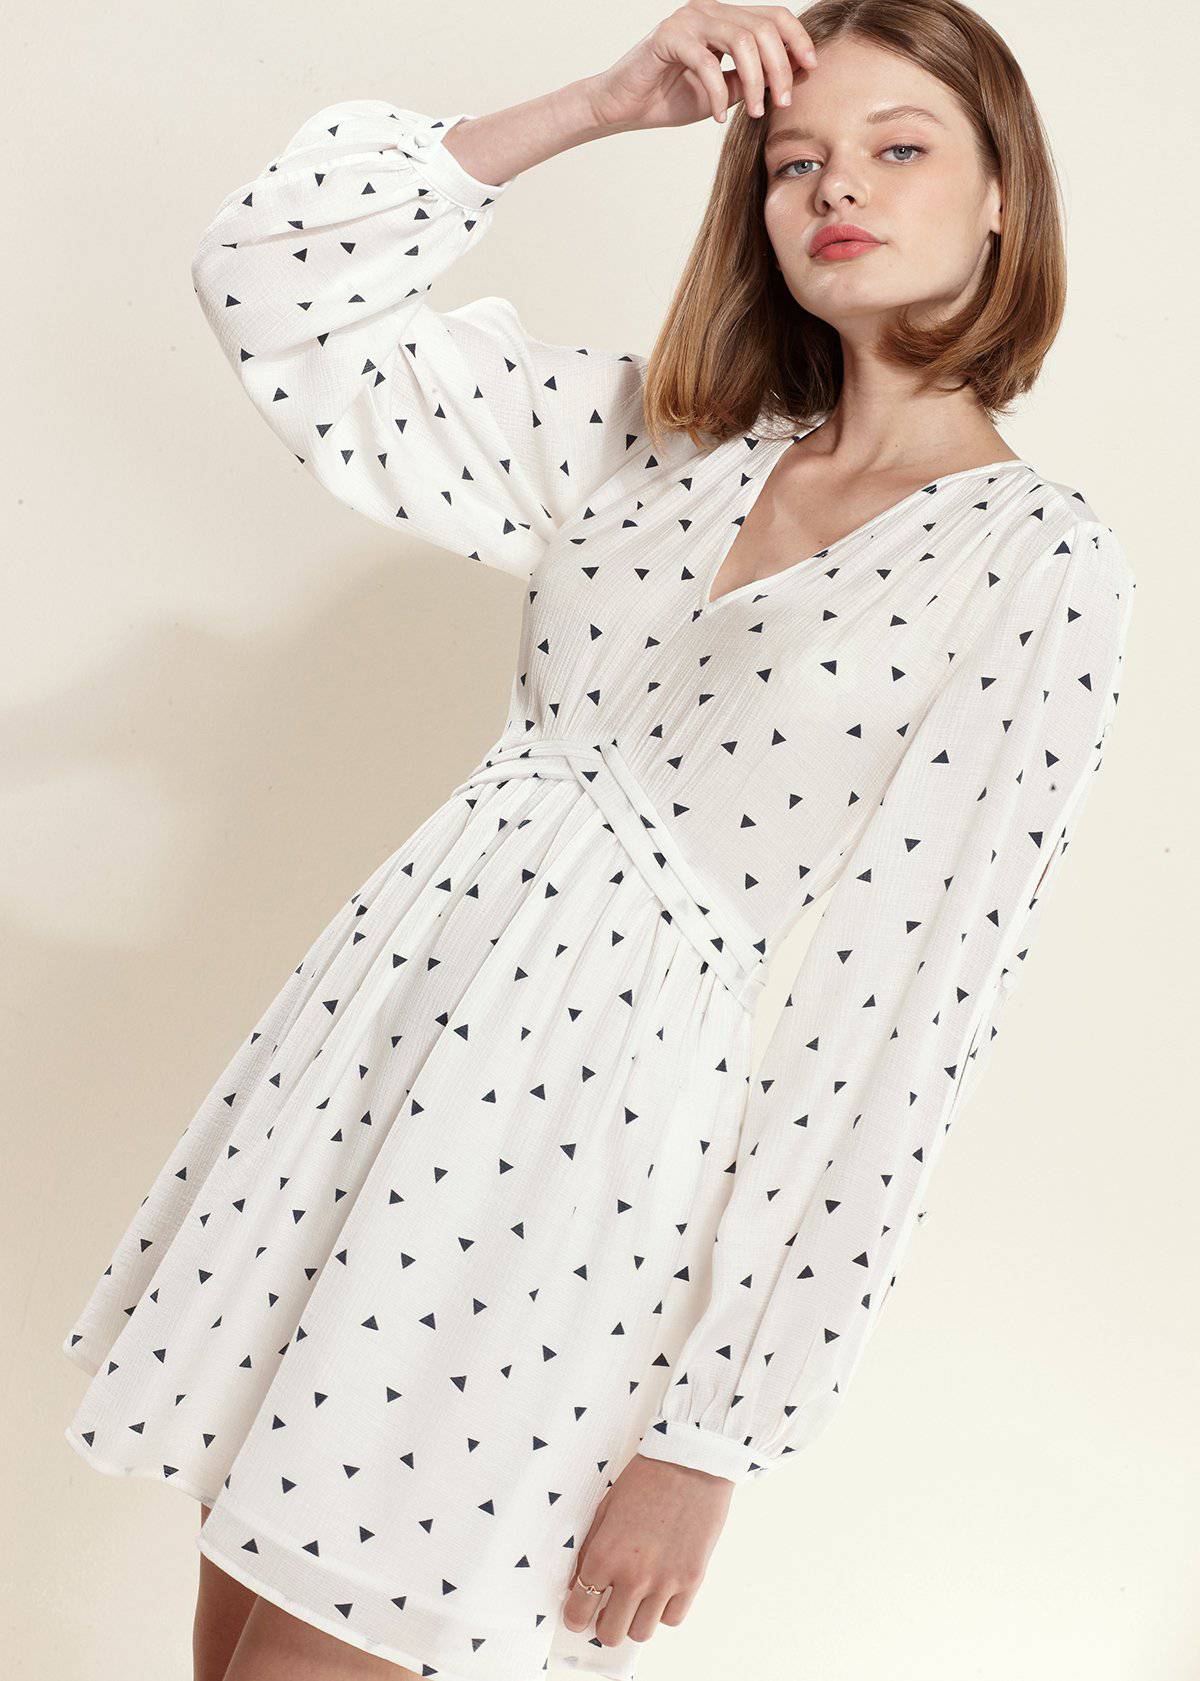 Triangle Print Long Sleeve Dress in White Triangle by Shop at Konus